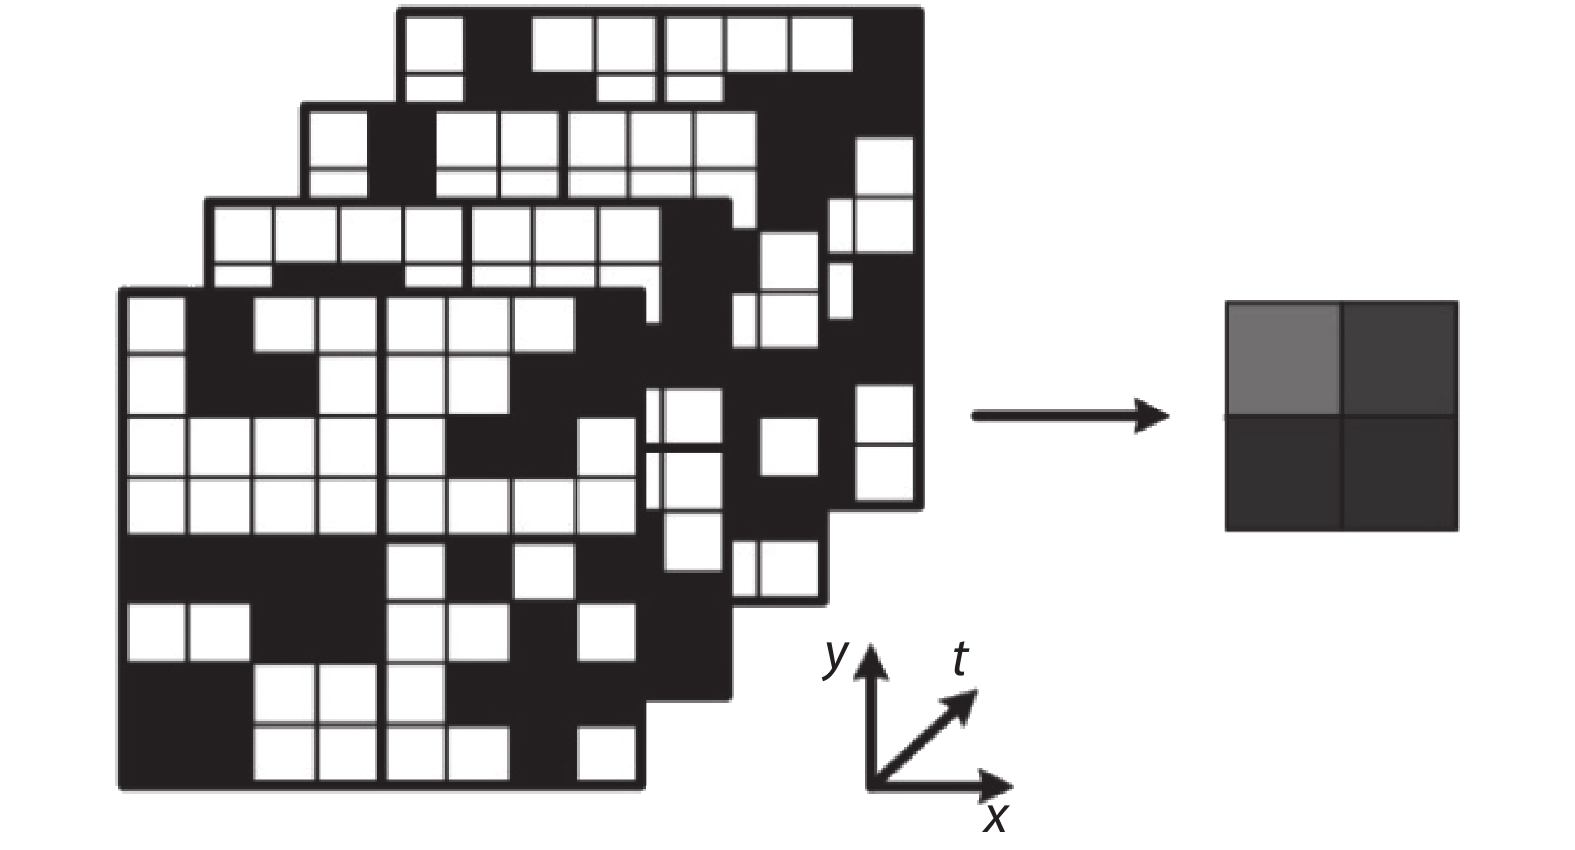 The QIS conceptual illustration. An 8 × 8 × 4 spatial-temporal data cube of jots in the QIS (left) is reconstructed to a 2 × 2 data plane of pixels in the output image (right). Each data of pixels is equal to the sum of a 4 × 4 × 4 data sub-cube of jots.